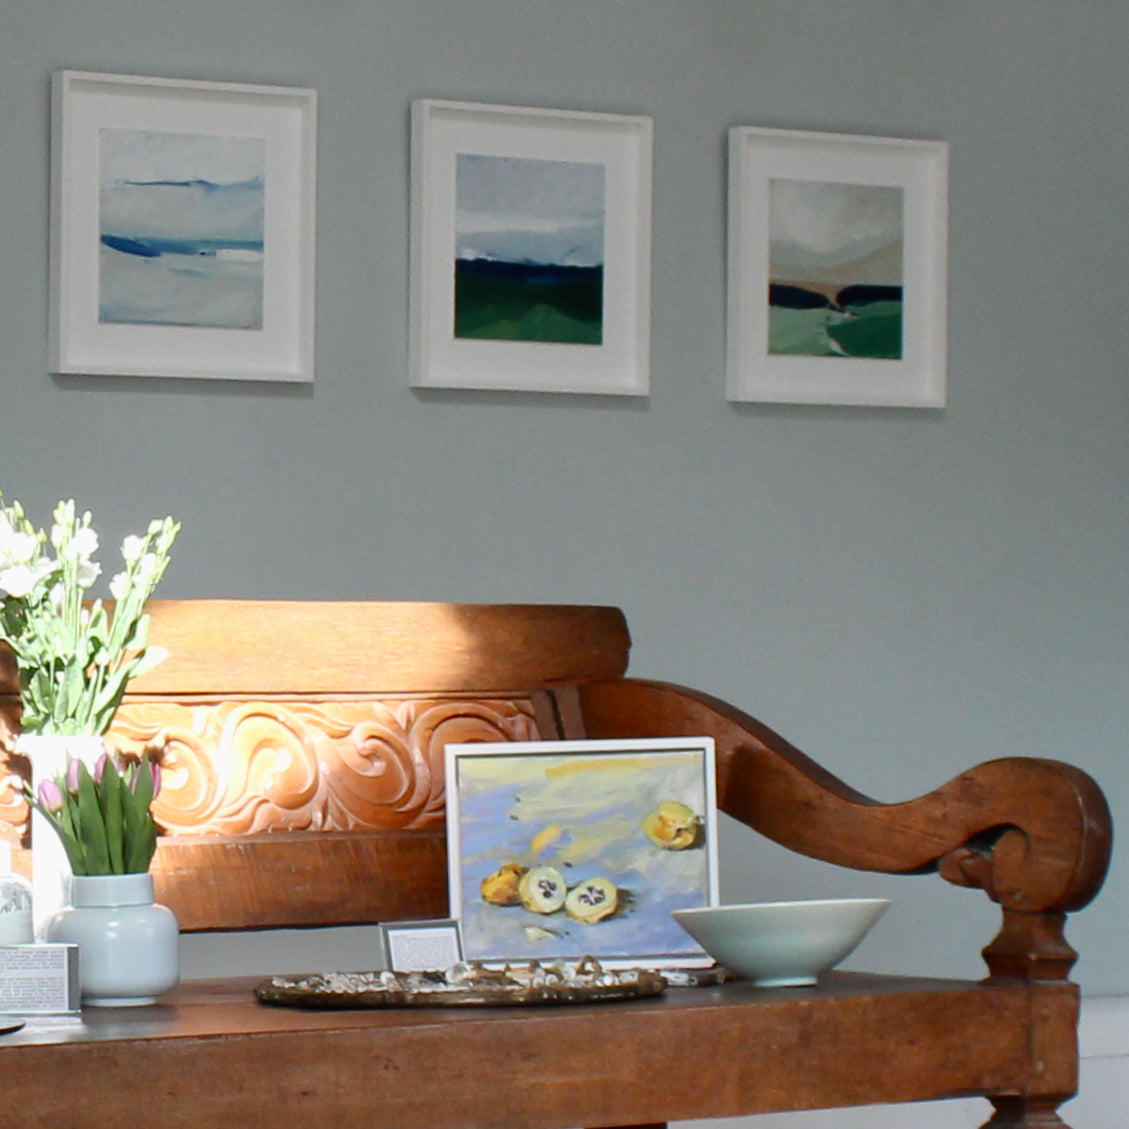 Three paintings of abstract landscapes on a gallery wall above a wooden bench.